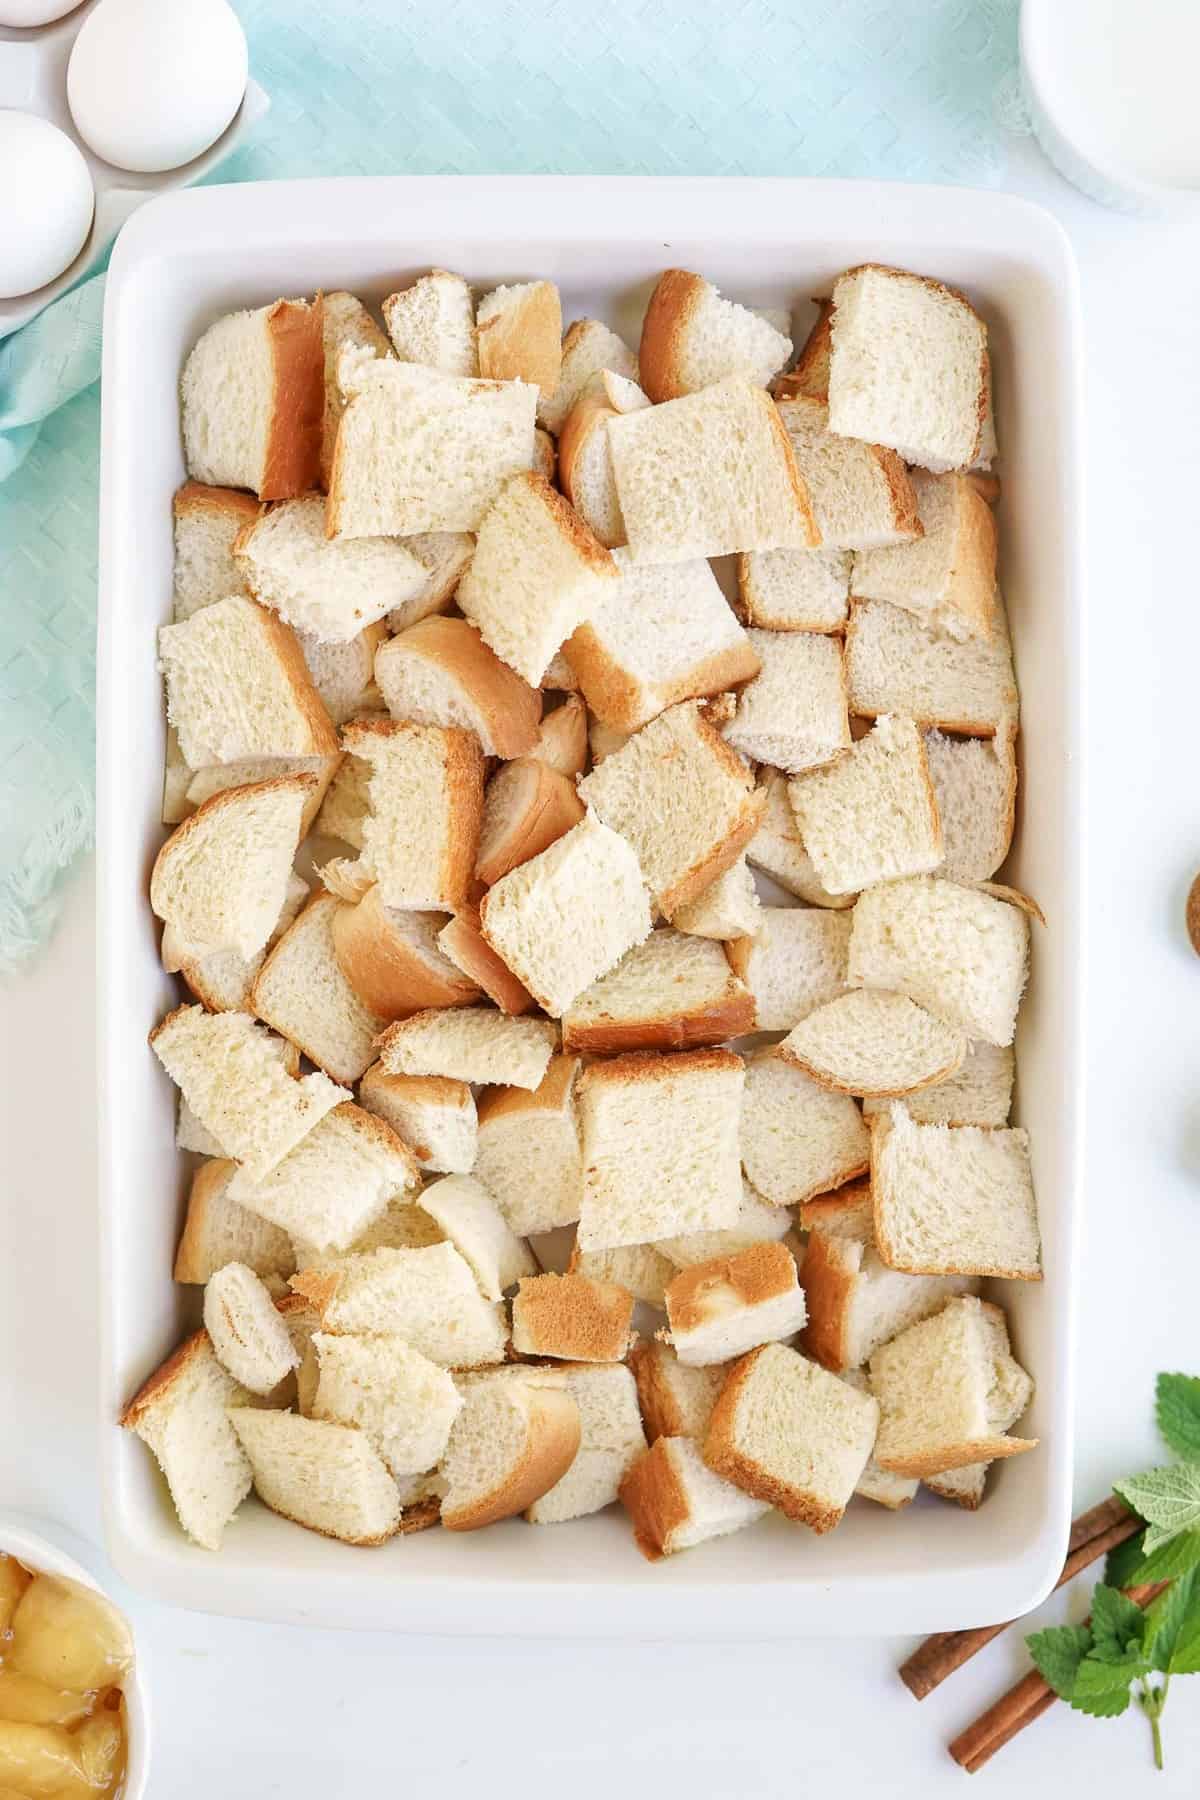 Cubed bread in a white baking dish.